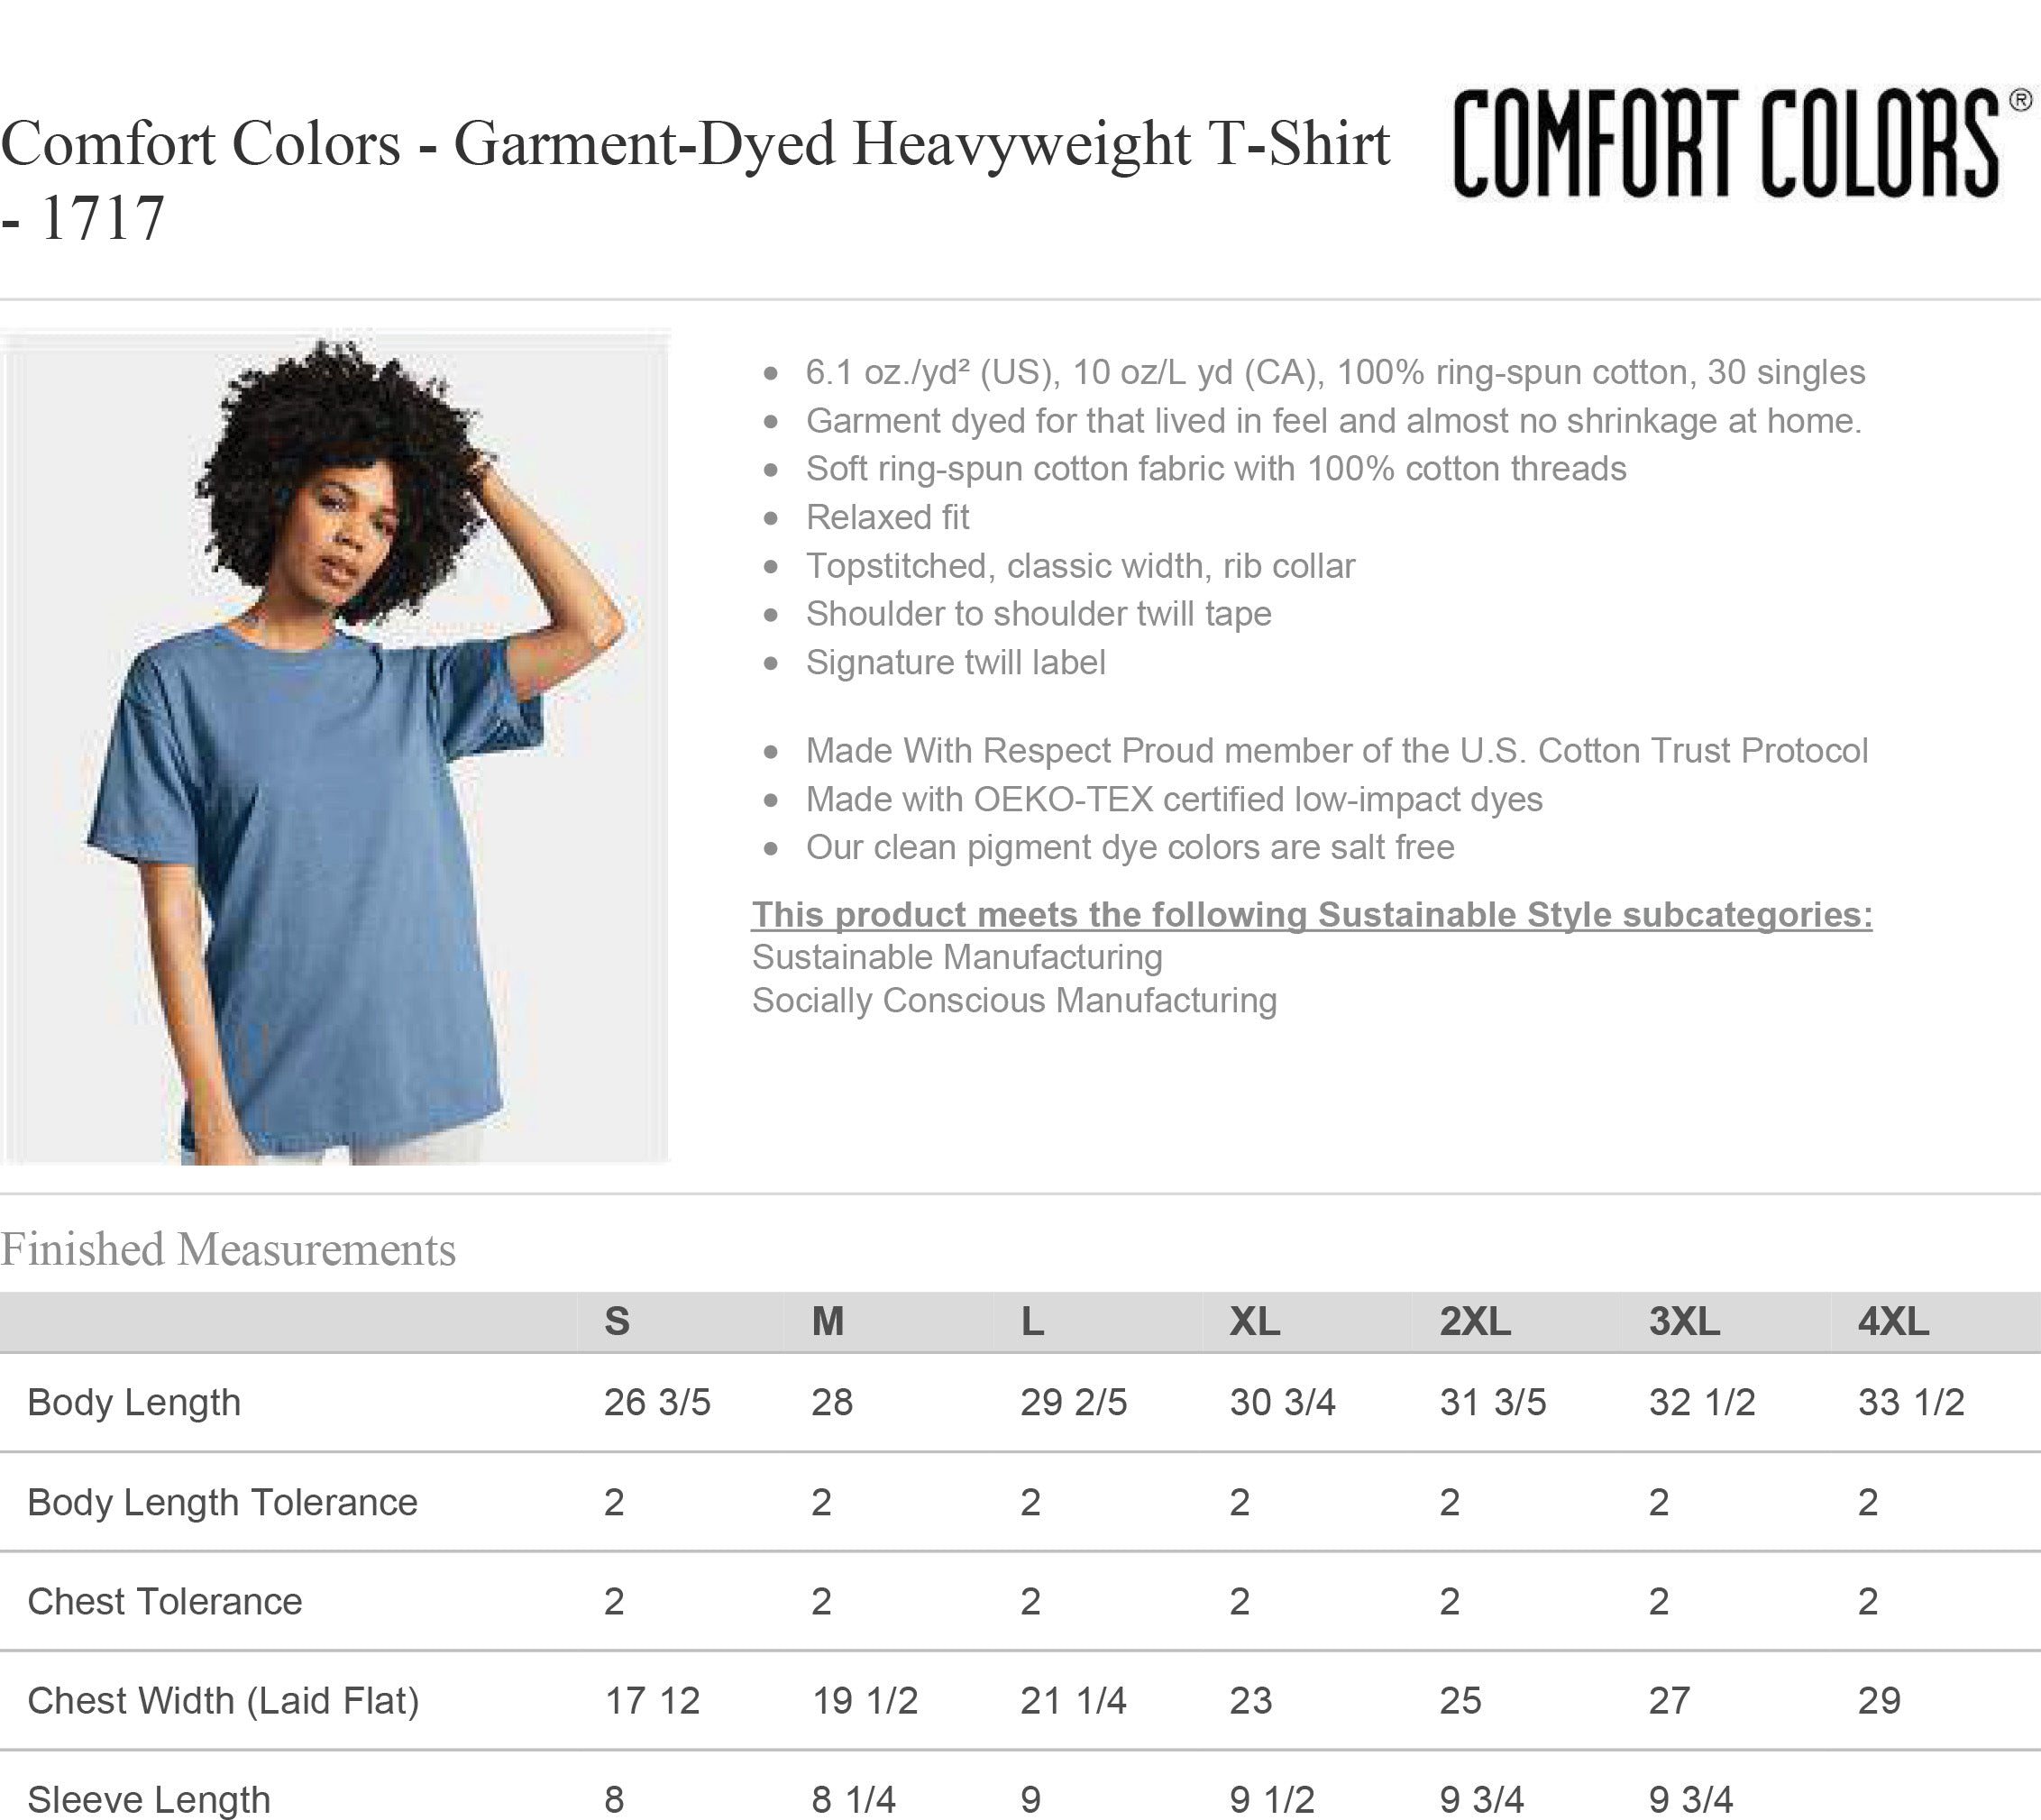 1717 Premium Garment Dyed Sizing Chart and Specs